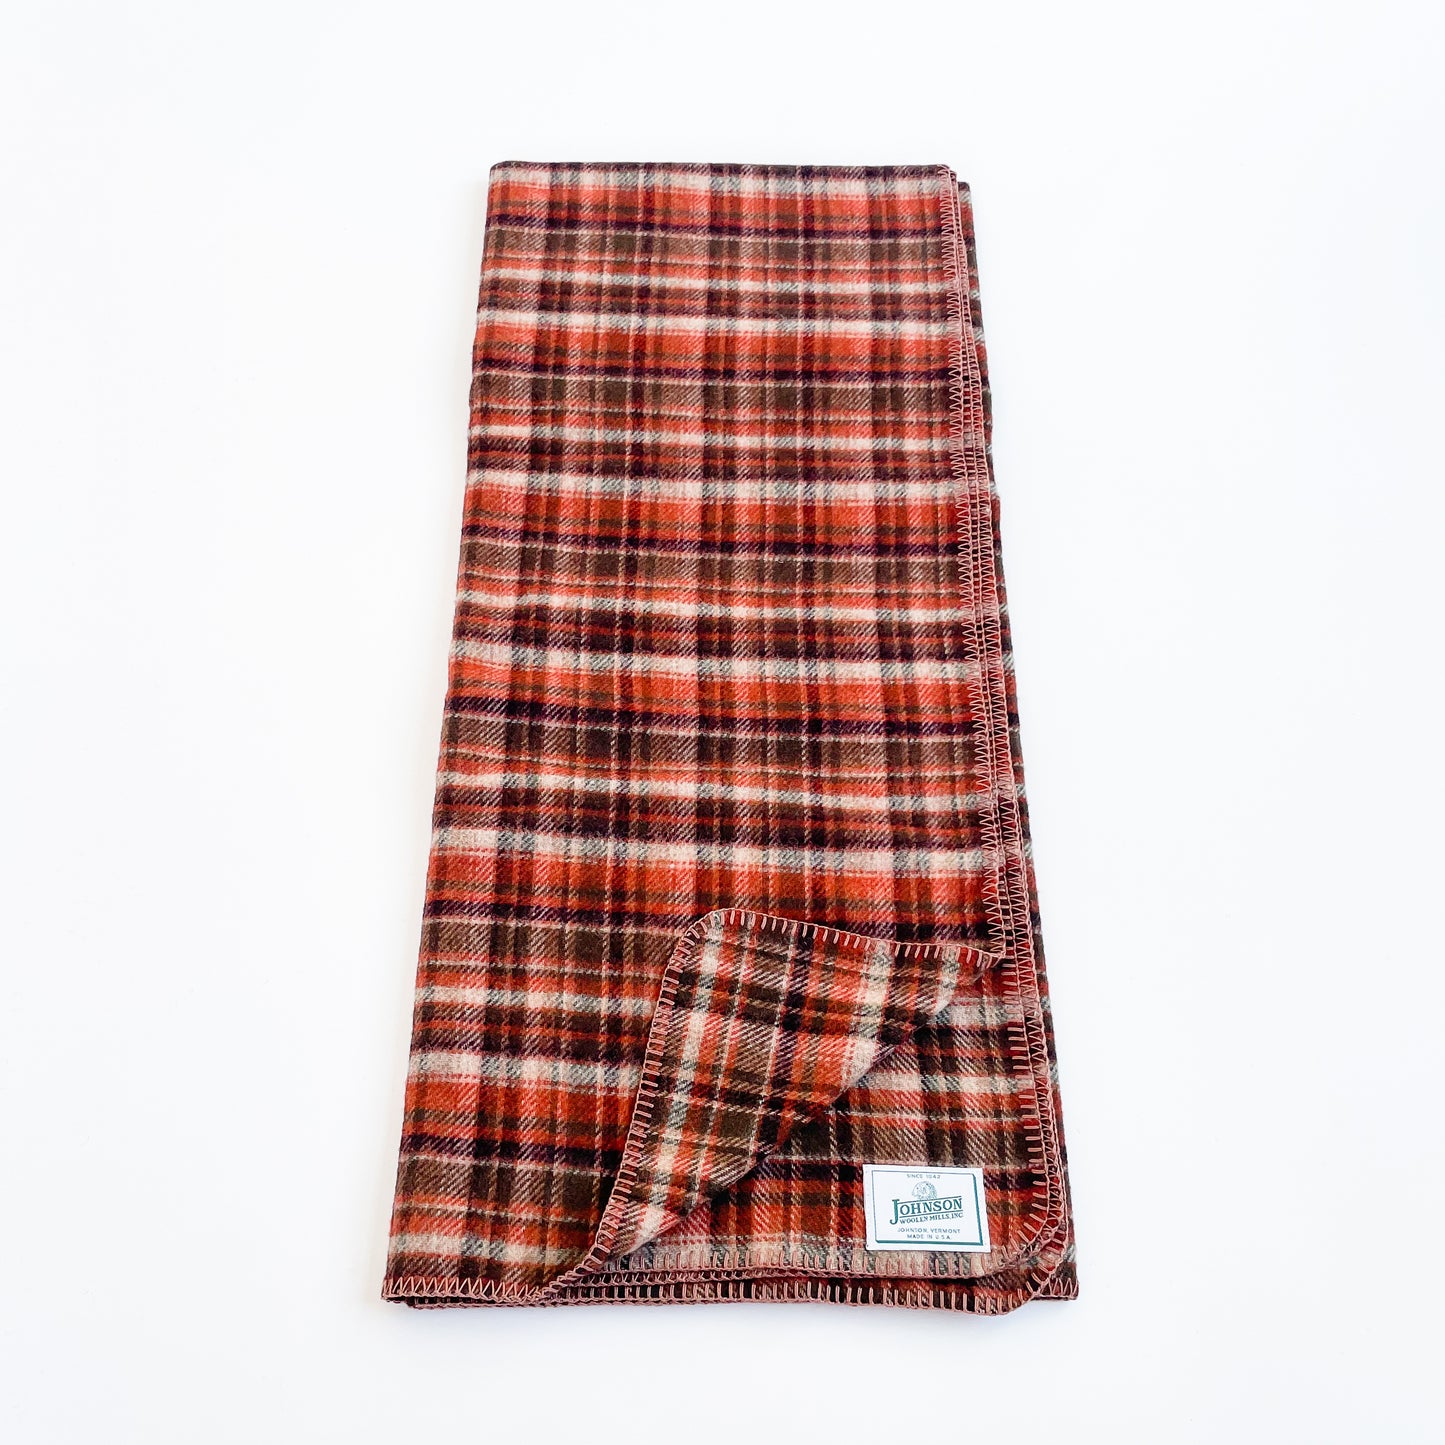 Johnson Woolen Mills Rust Tan Brown Plaid folded blanket length wise front view 